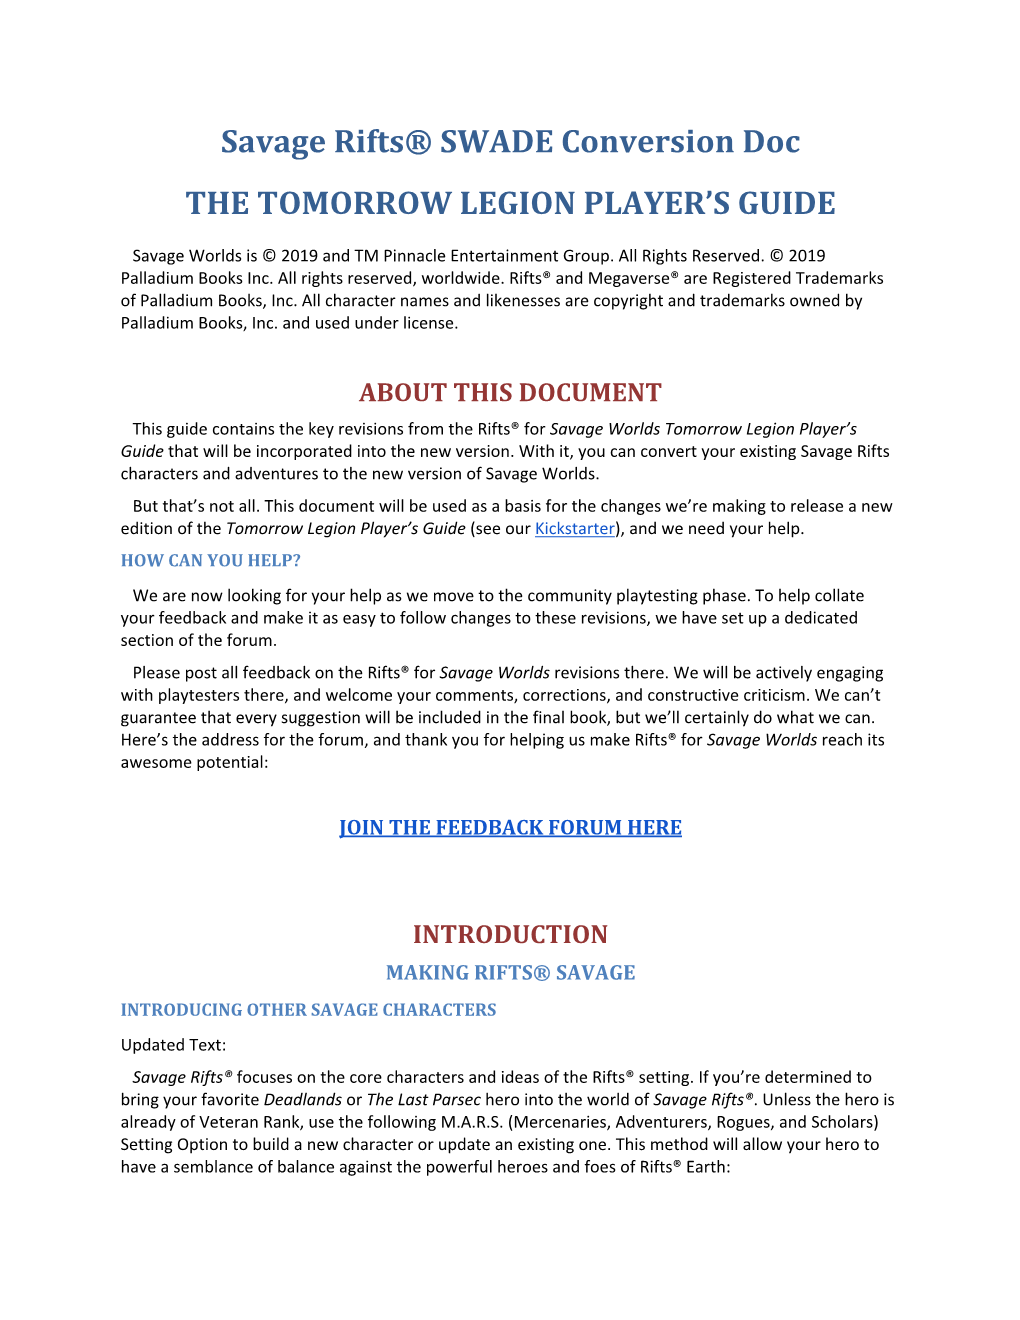 Savage Rifts® SWADE Conversion Doc the TOMORROW LEGION PLAYER’S GUIDE